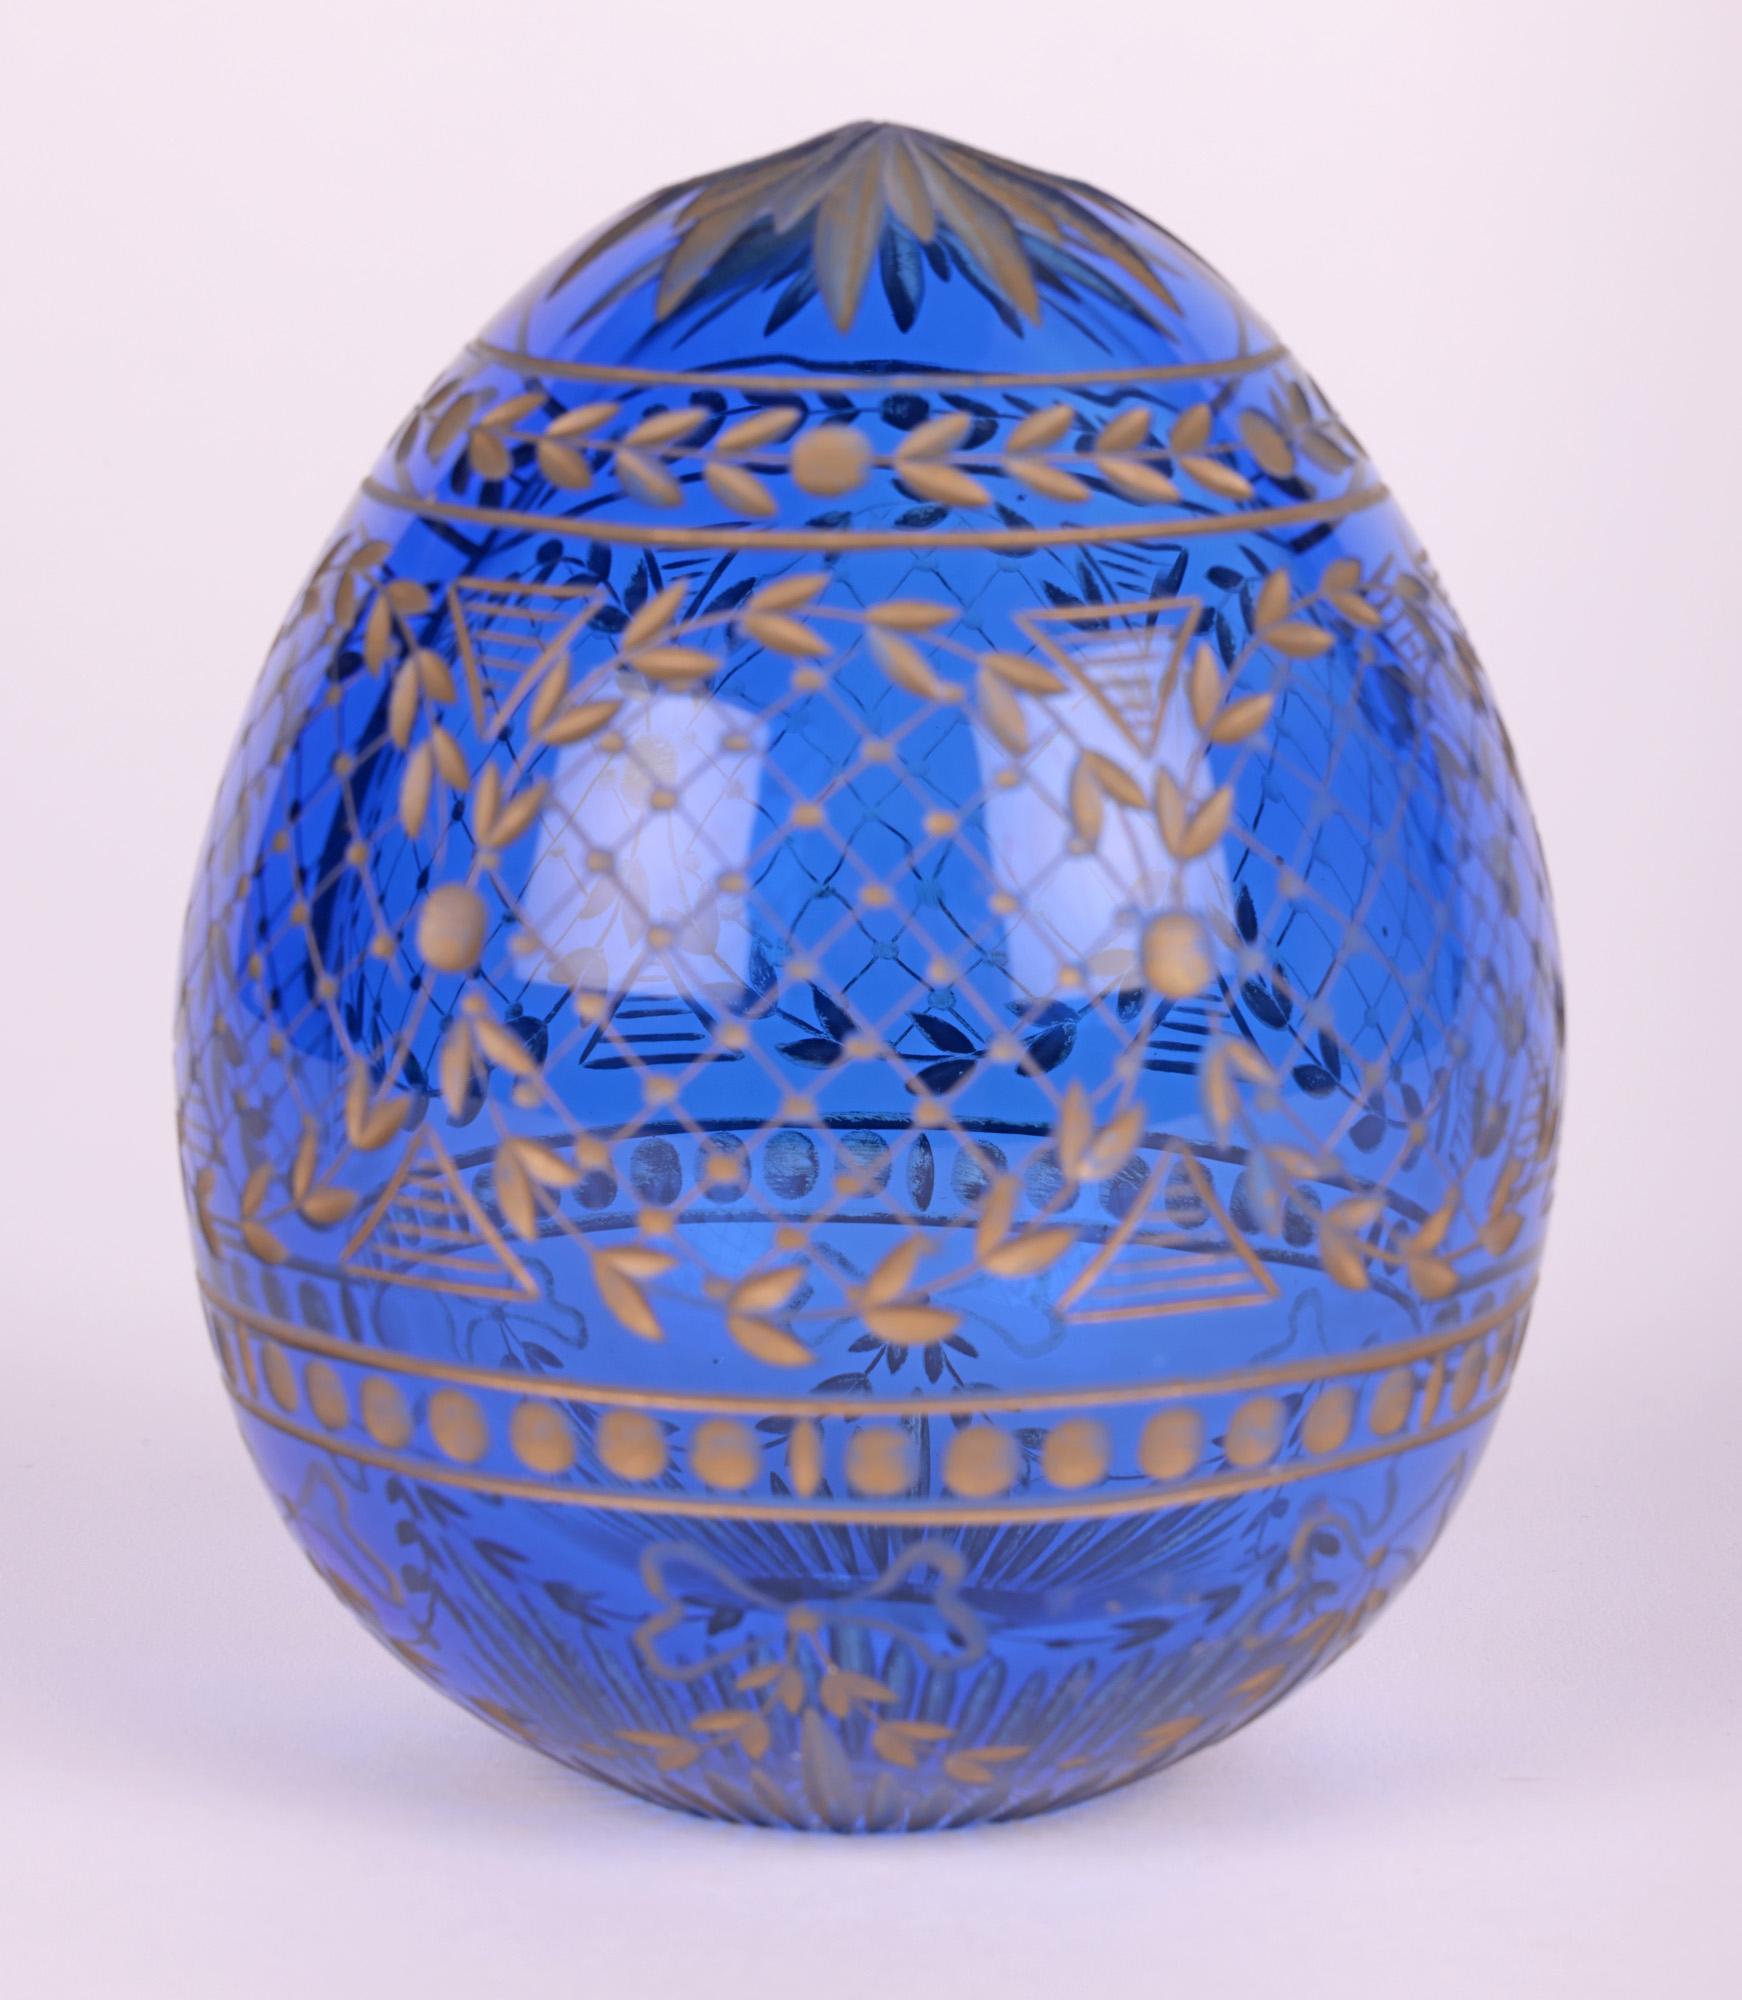 Russian Faberge Attributed Blue Glass Egg with Engraved Designs For Sale 3